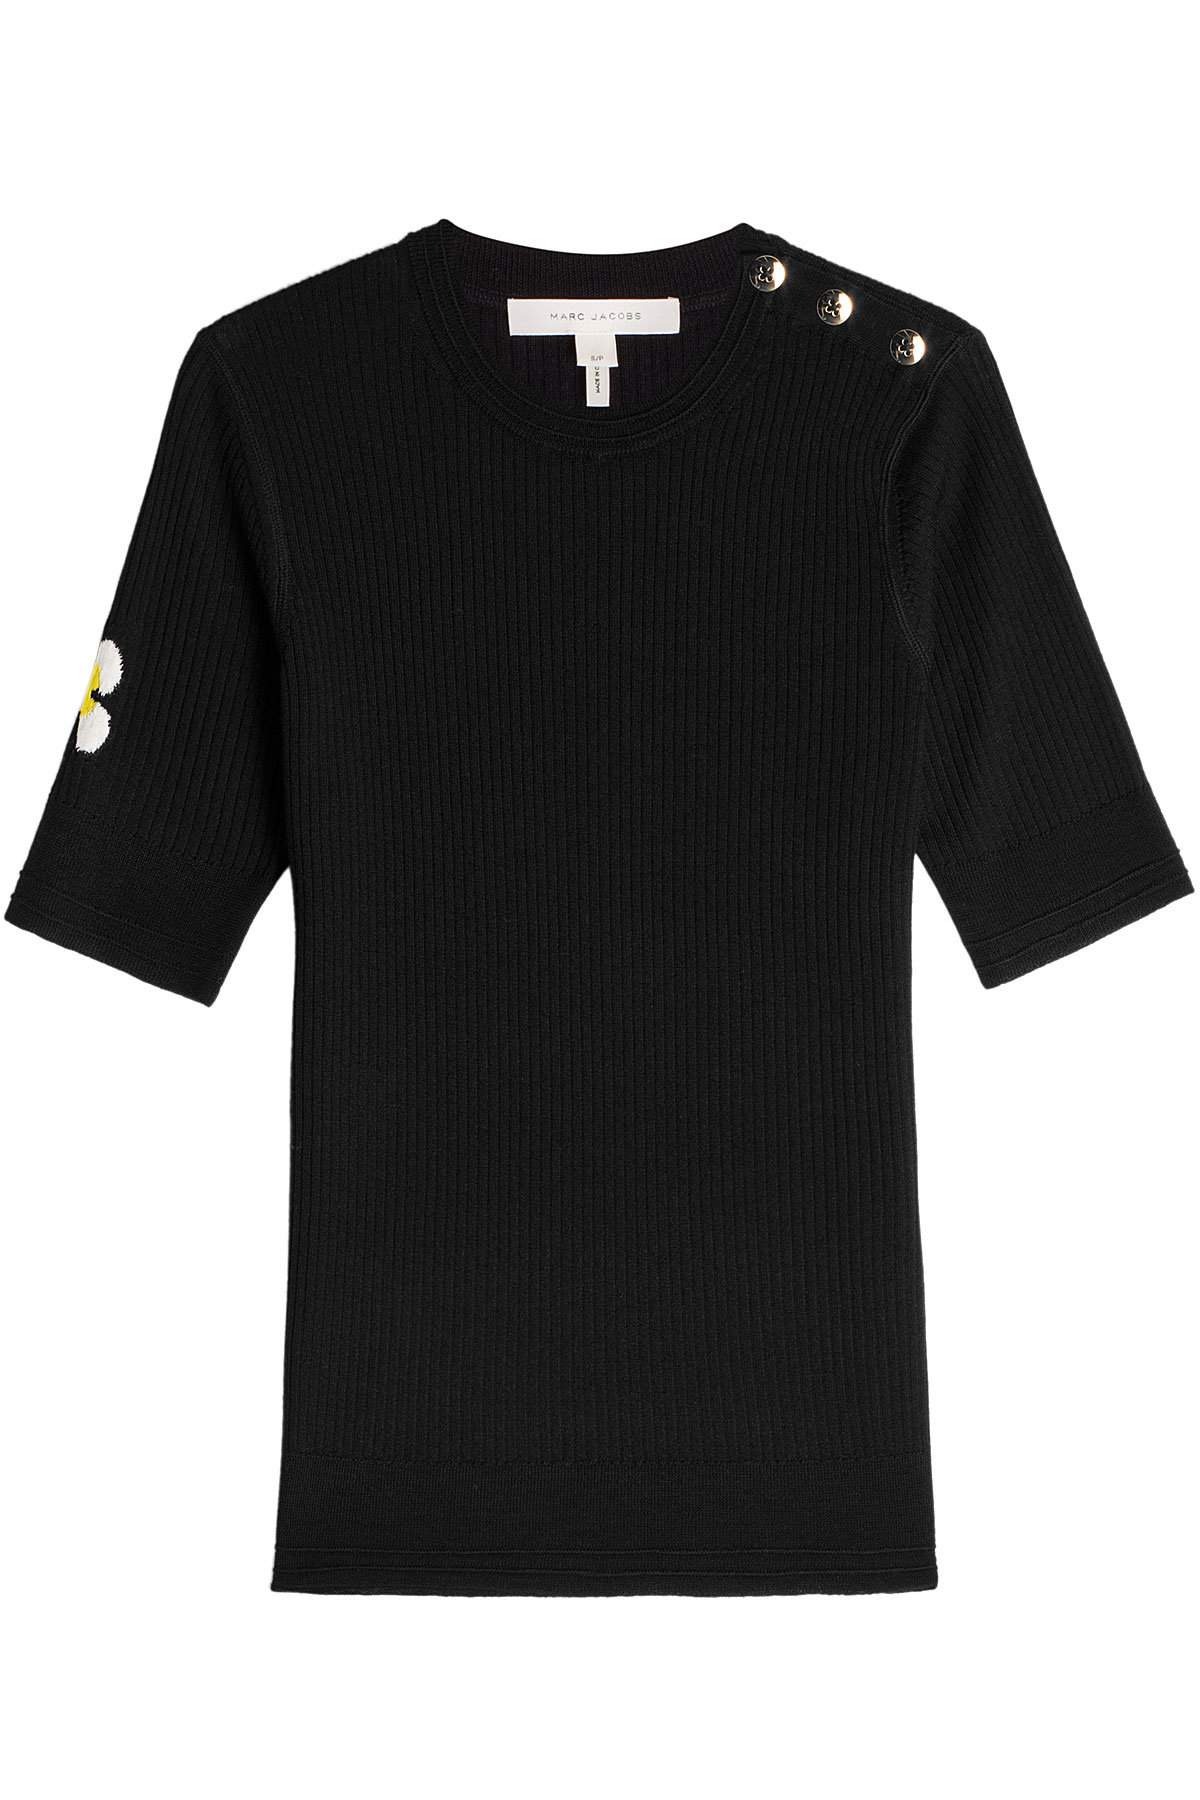 Marc Jacobs - Merino Wool Top with Embossed Buttons